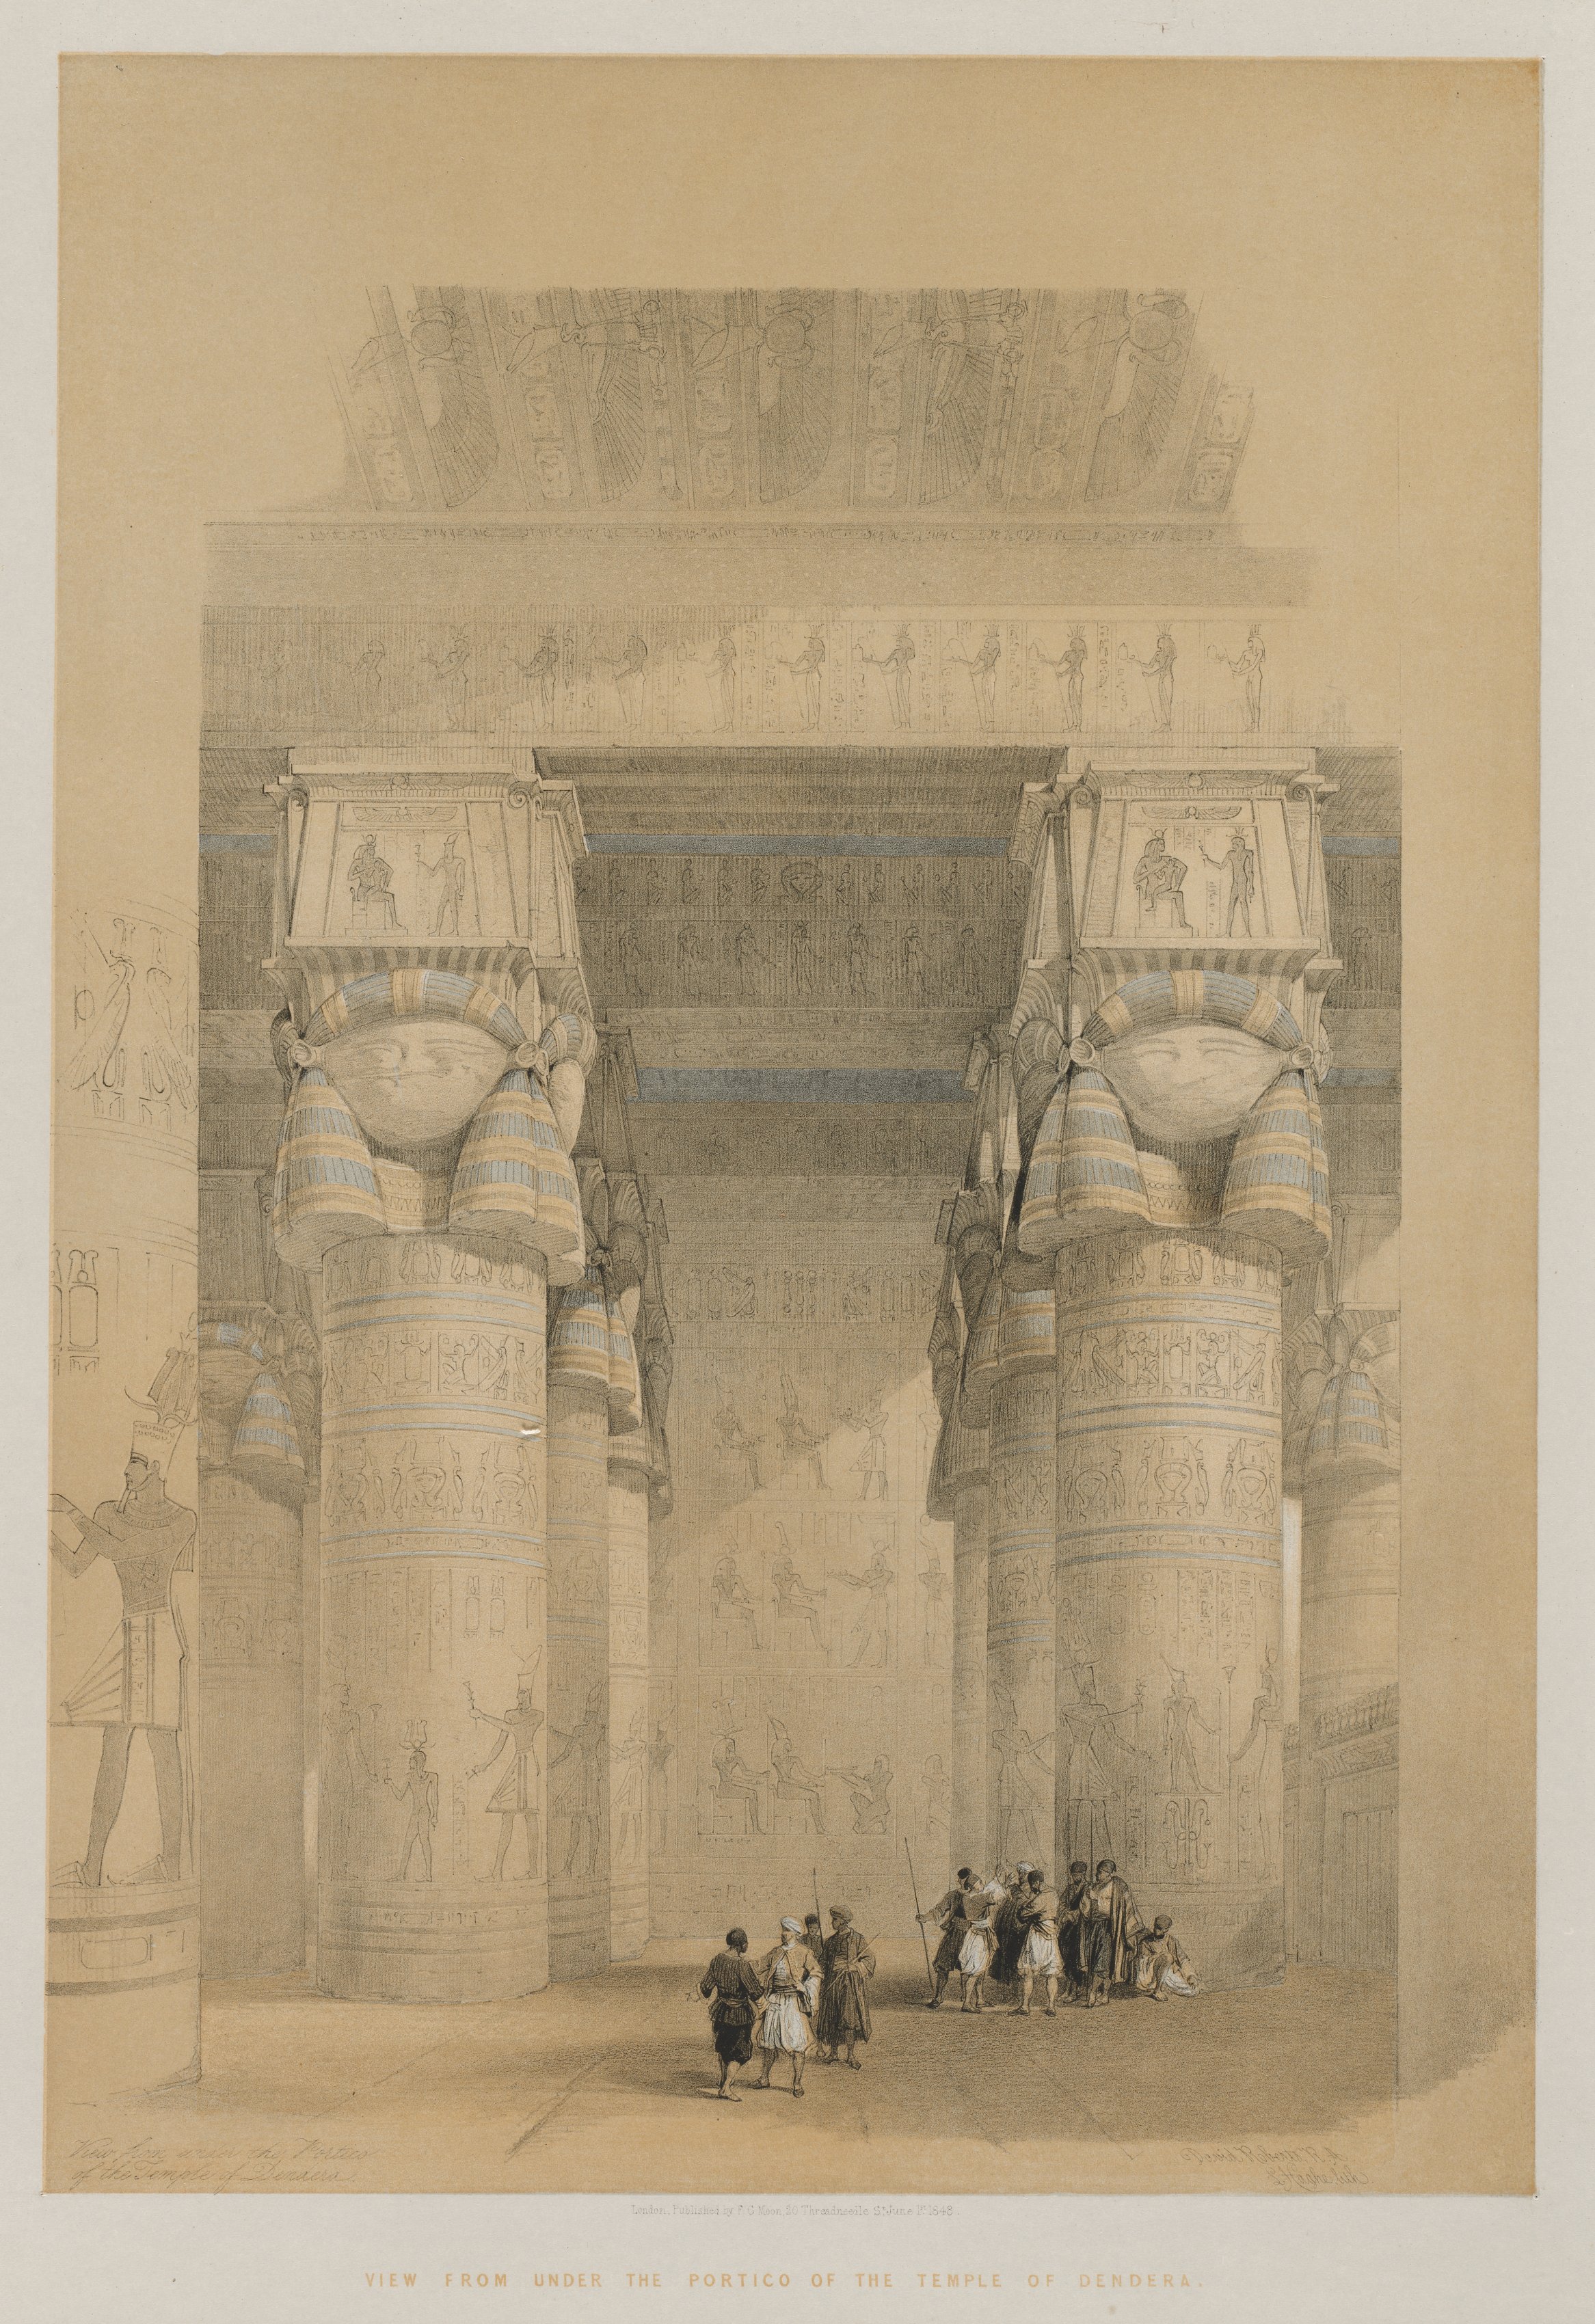 Egypt and Nubia, Volume II: View from Under the Portico of the Temple of Dendera